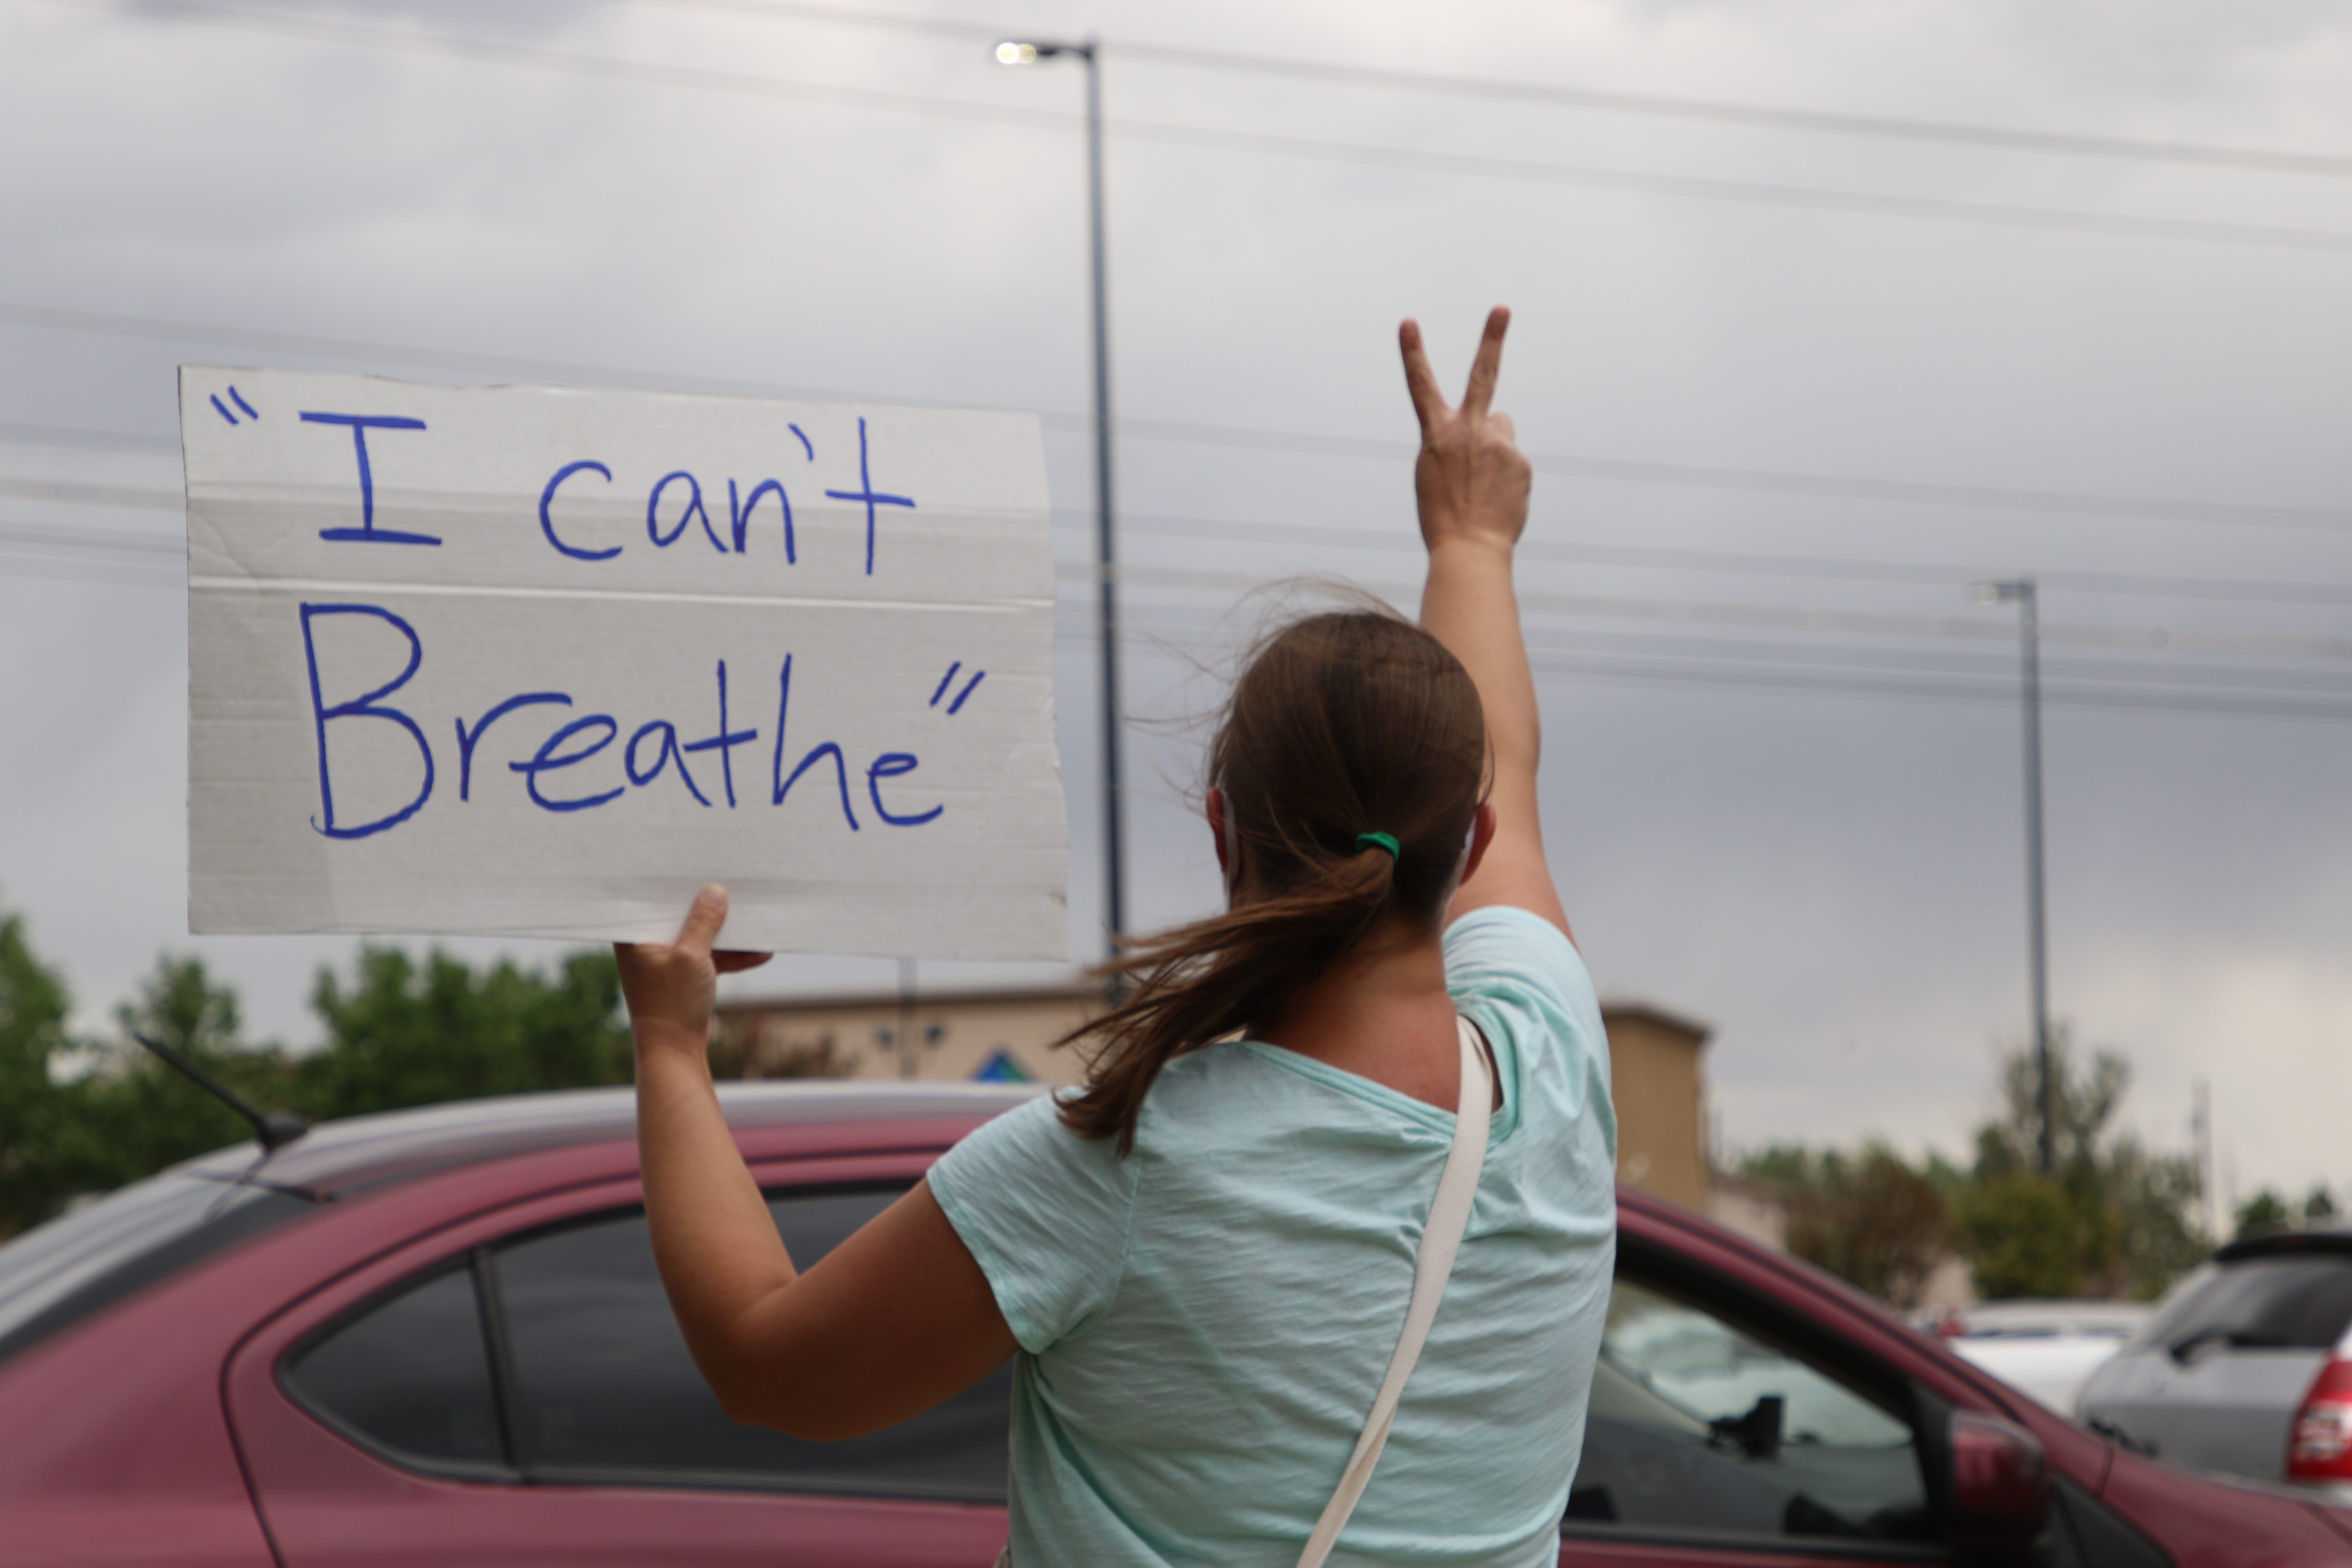 A community member flashes the peace sign during a protest on June 1 near the Animas Valley Mall in Farmington that called for justice in George Floyd's death in Minneapolis.